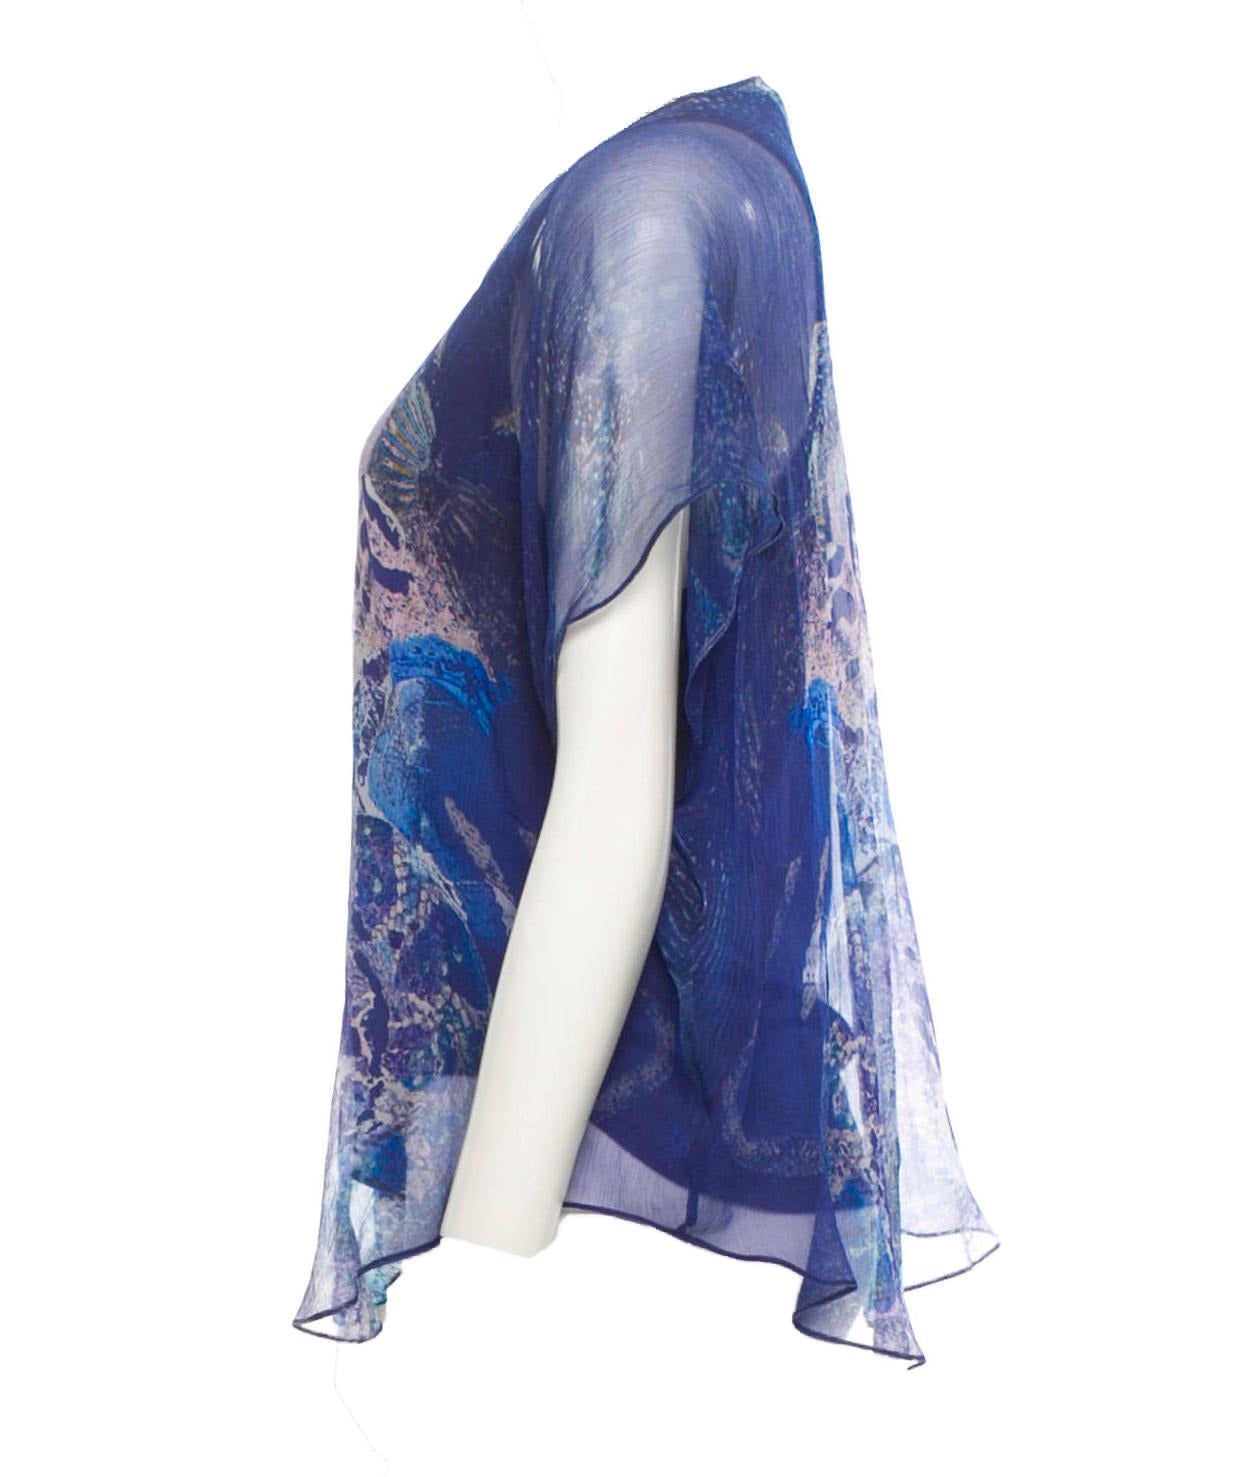 Rare collector's item Alexander McQueen multi-color sheer silk blouse from his famous Spring/Summer 2010 Plato's Atlantis Collection with scoop neck, bat wing sleeves, and white, light blue, pink and black reptile print at front.

Bust 34”, Waist